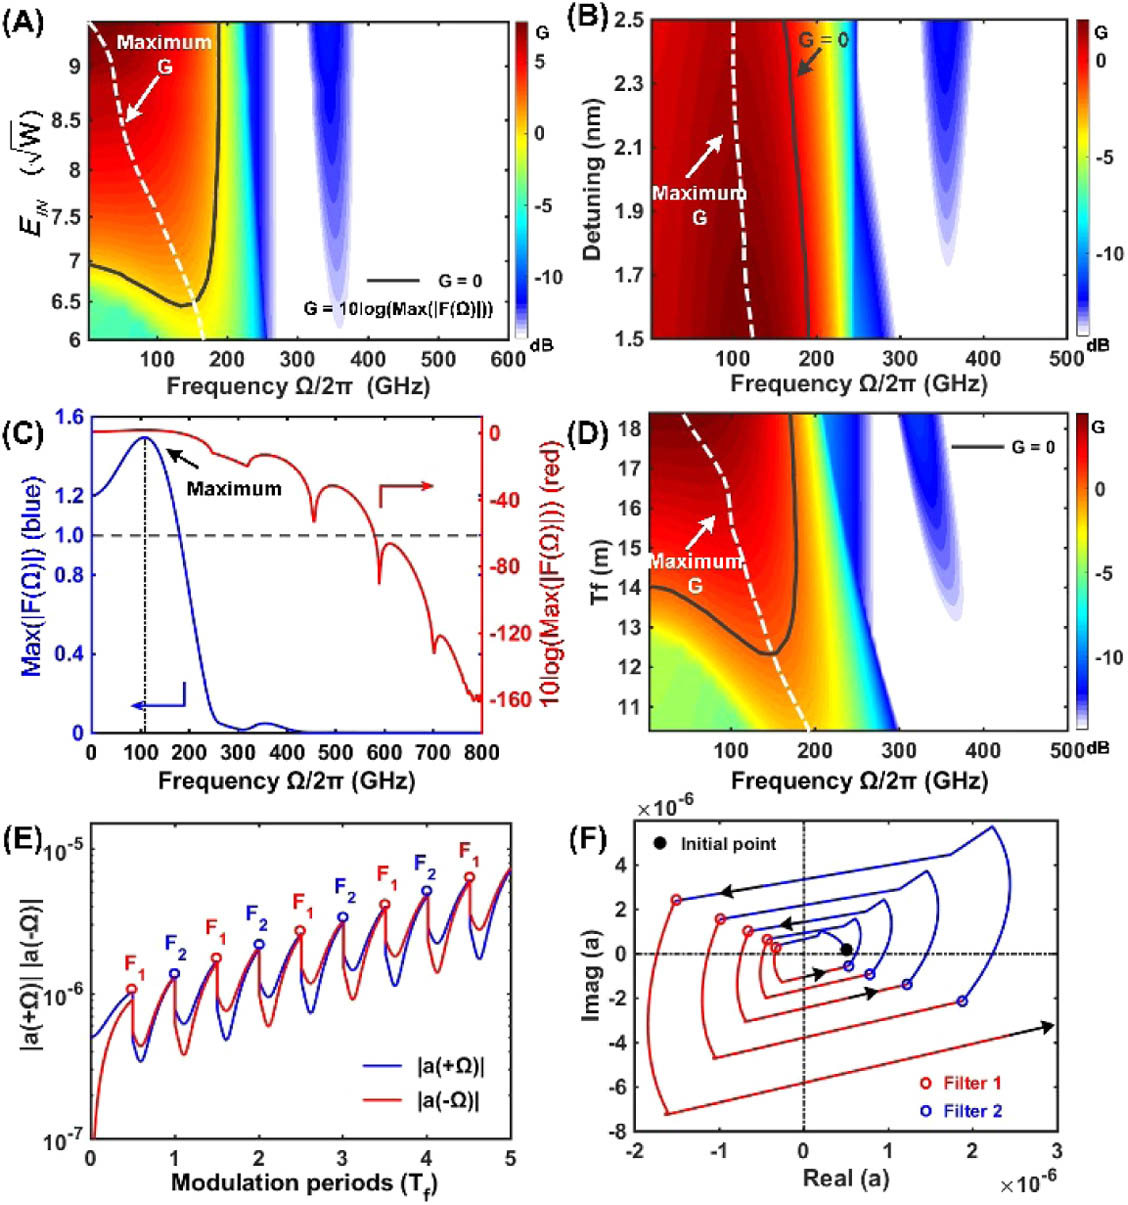 Floquet linear stability analysis in the all-normal dispersion regime. (A) Floquet spectrum as a function of the pump; (B) Floquet spectrum as a function of frequency detuning of filters; (C) Floquet spectrum calculated with parameters of ΔΩ=2 nm, EIN=7.0, and δ0=1.3 rad; (D) Floquet spectrum as a function of the modulation period Tf. (E) Evolution of the absolute values of the amplitudes of the most unstable modes a(+Ω) and a(−Ω) (blue and red lines, respectively). The losses are introduced at points F1, F2, etc., in time. (F) Dynamics of the complex amplitude a(+Ω) of the most unstable mode calculated by direct integration of the Ikeda map. The adjacent half-cavity periods, after the longer or shorter-wavelength spectral filters, are represented by different colors of blue and red, respectively. The direction of temporal evolution is indicated by arrows.